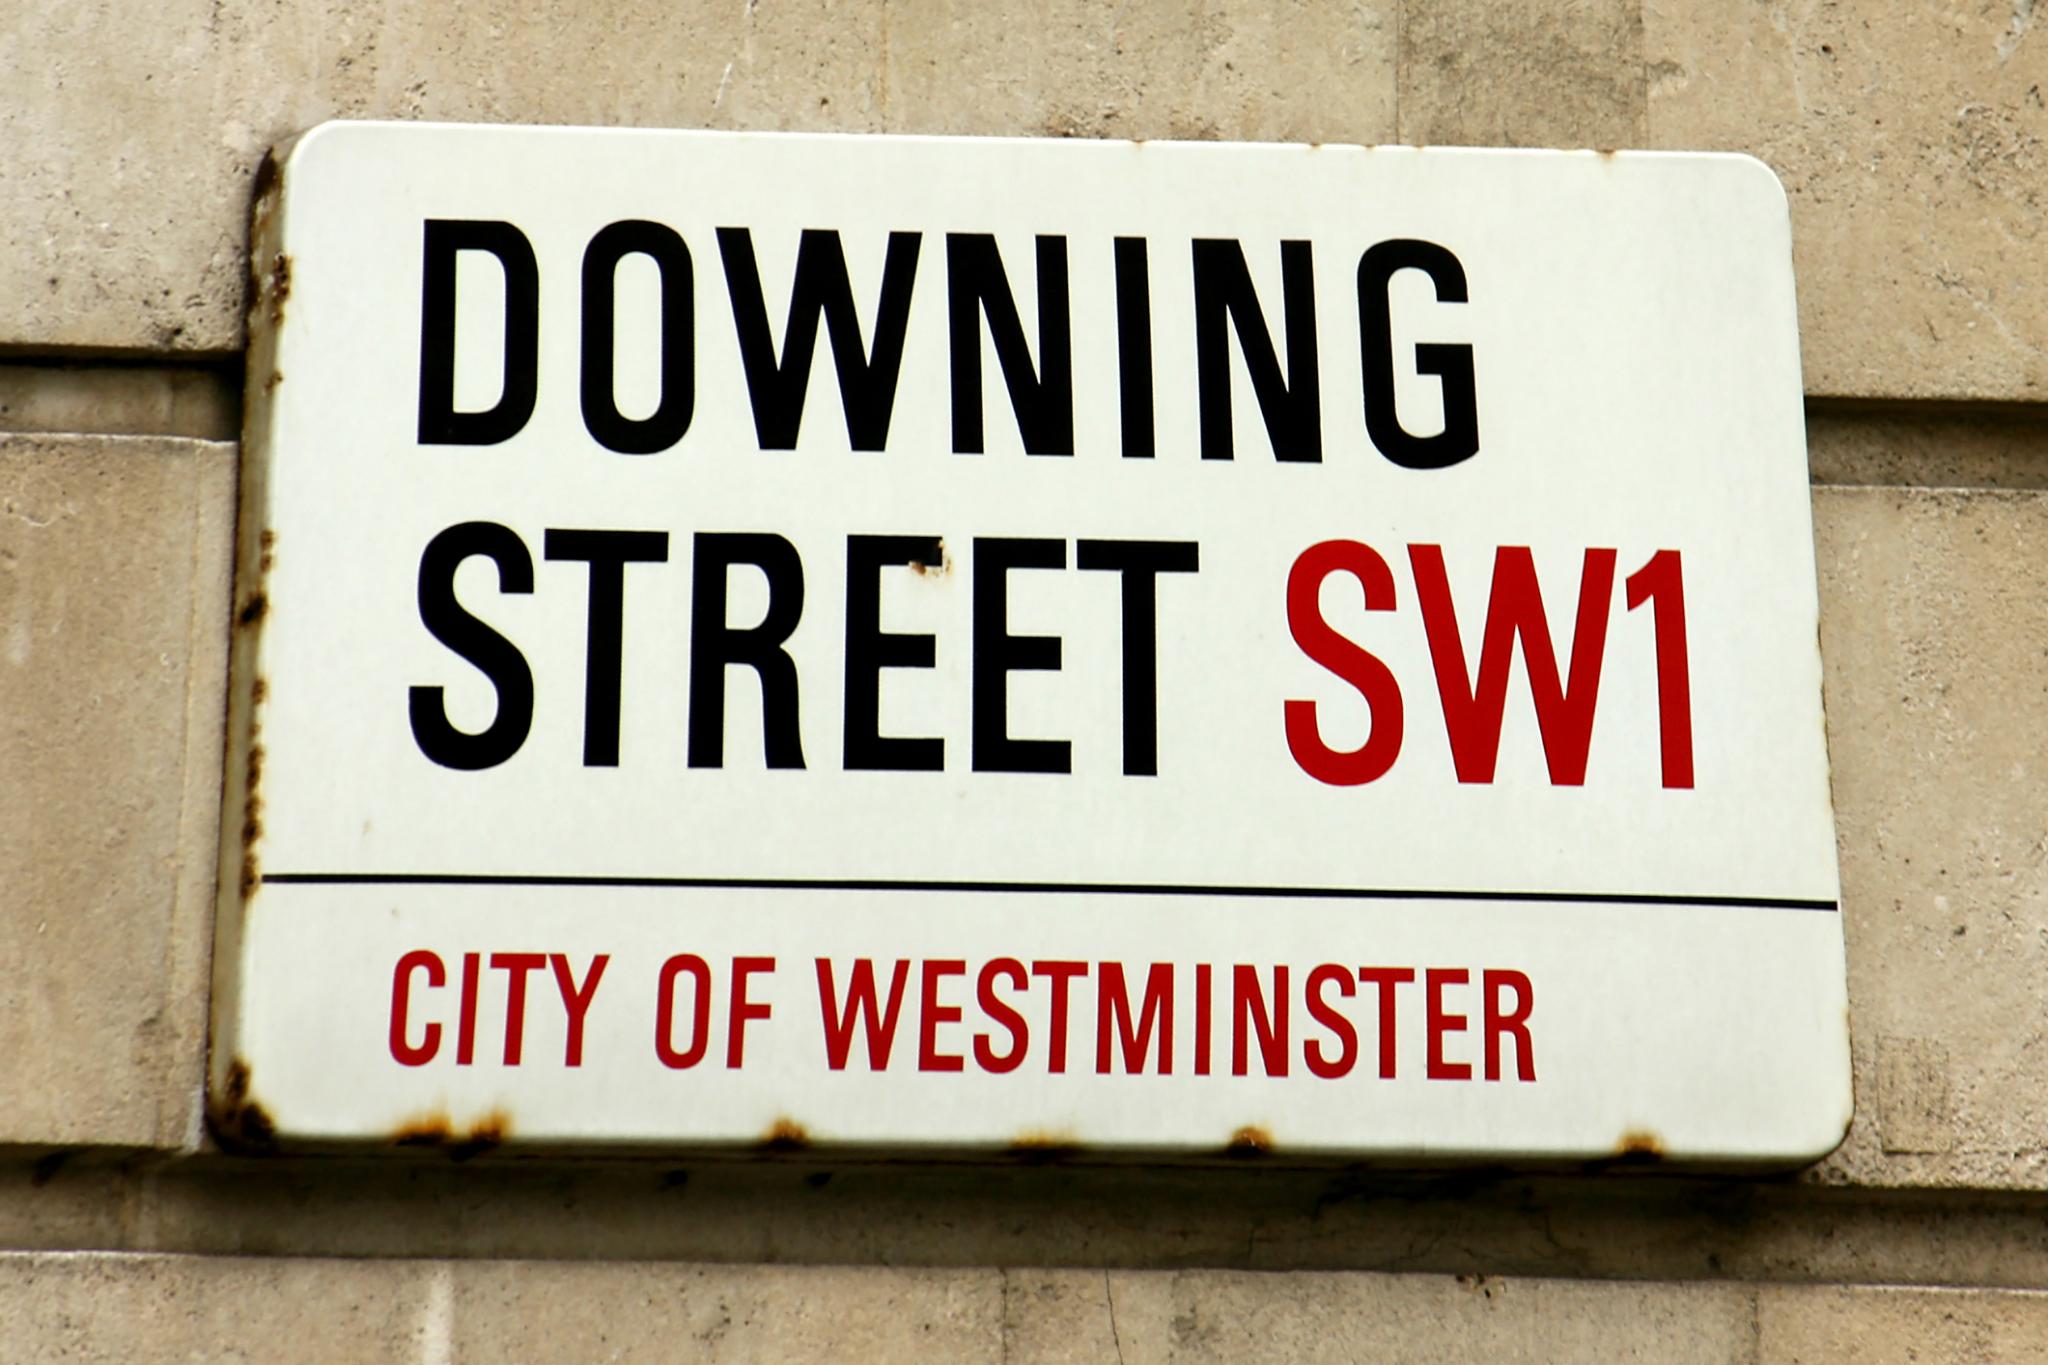 Street Sign for Downing Street